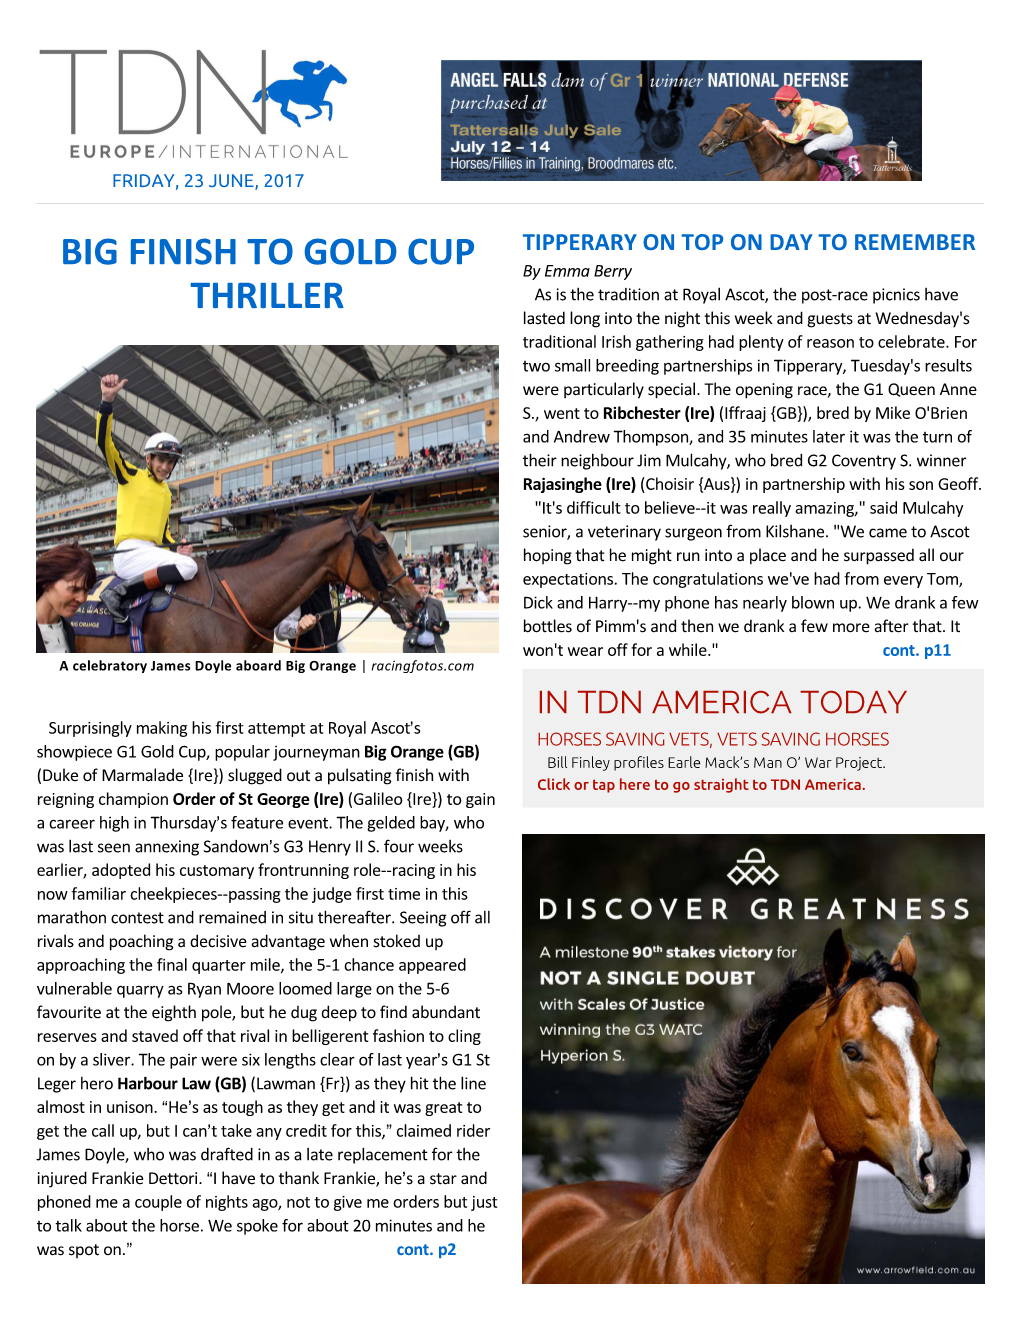 Big Finish to Gold Cup Thriller Cont